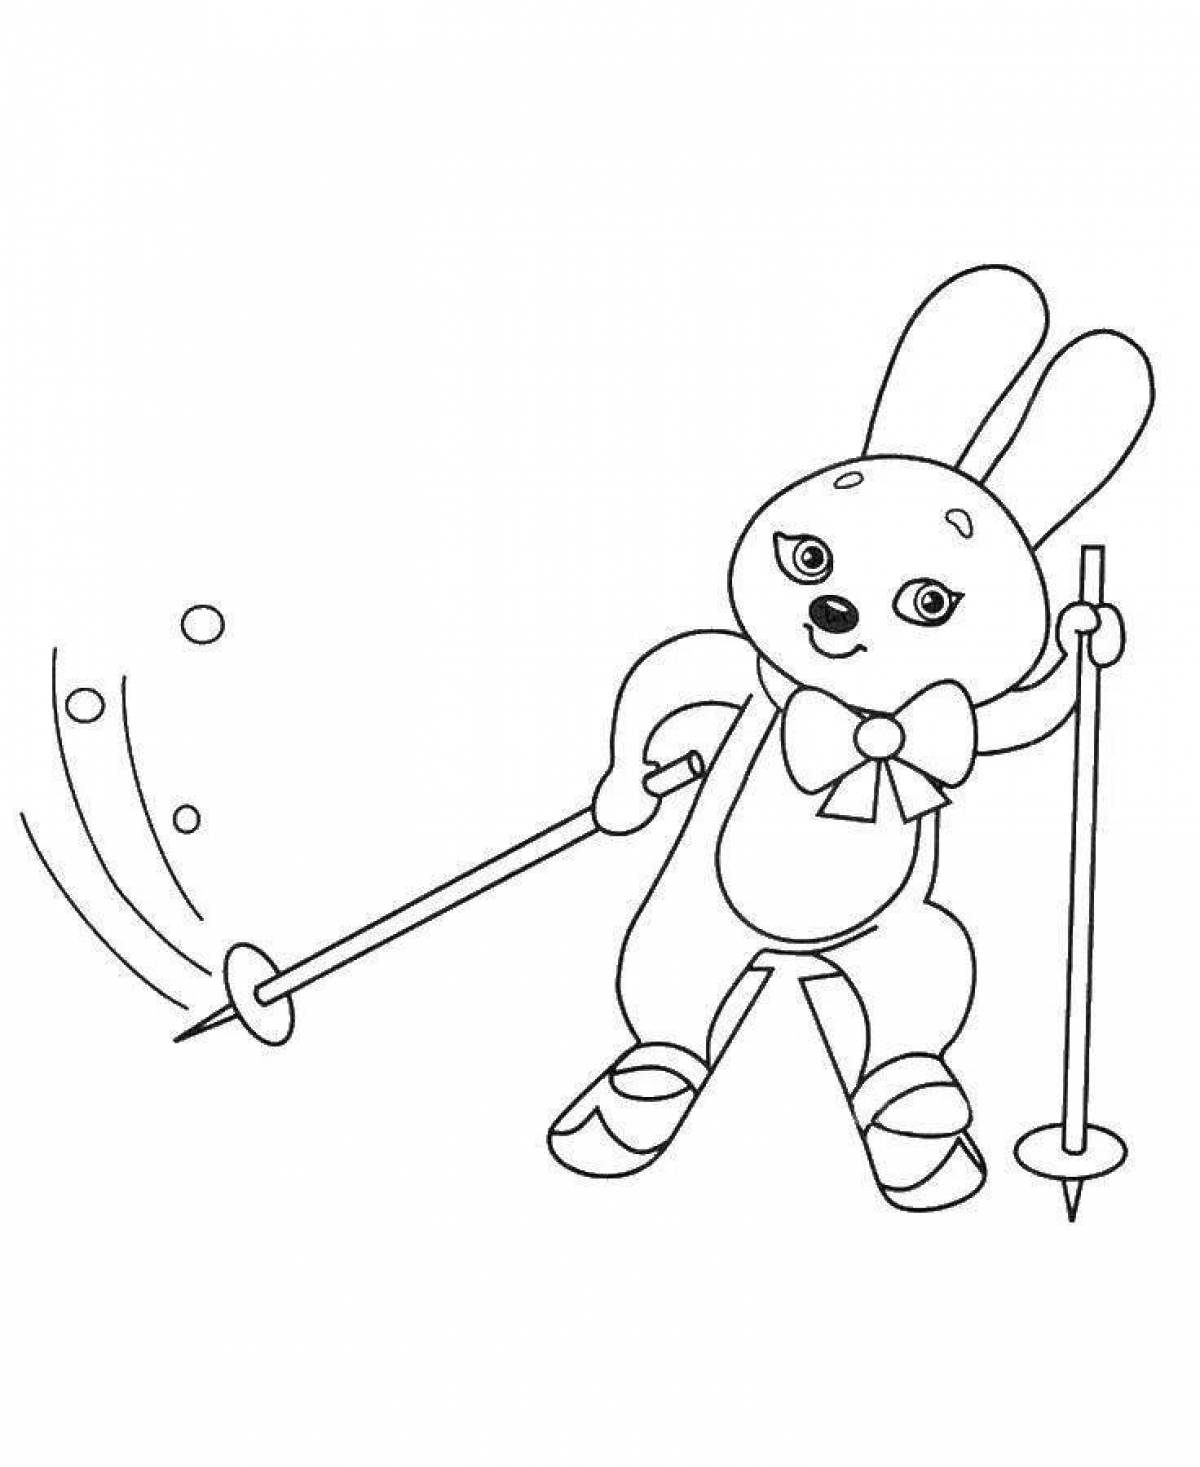 Colourful olympic bear coloring page